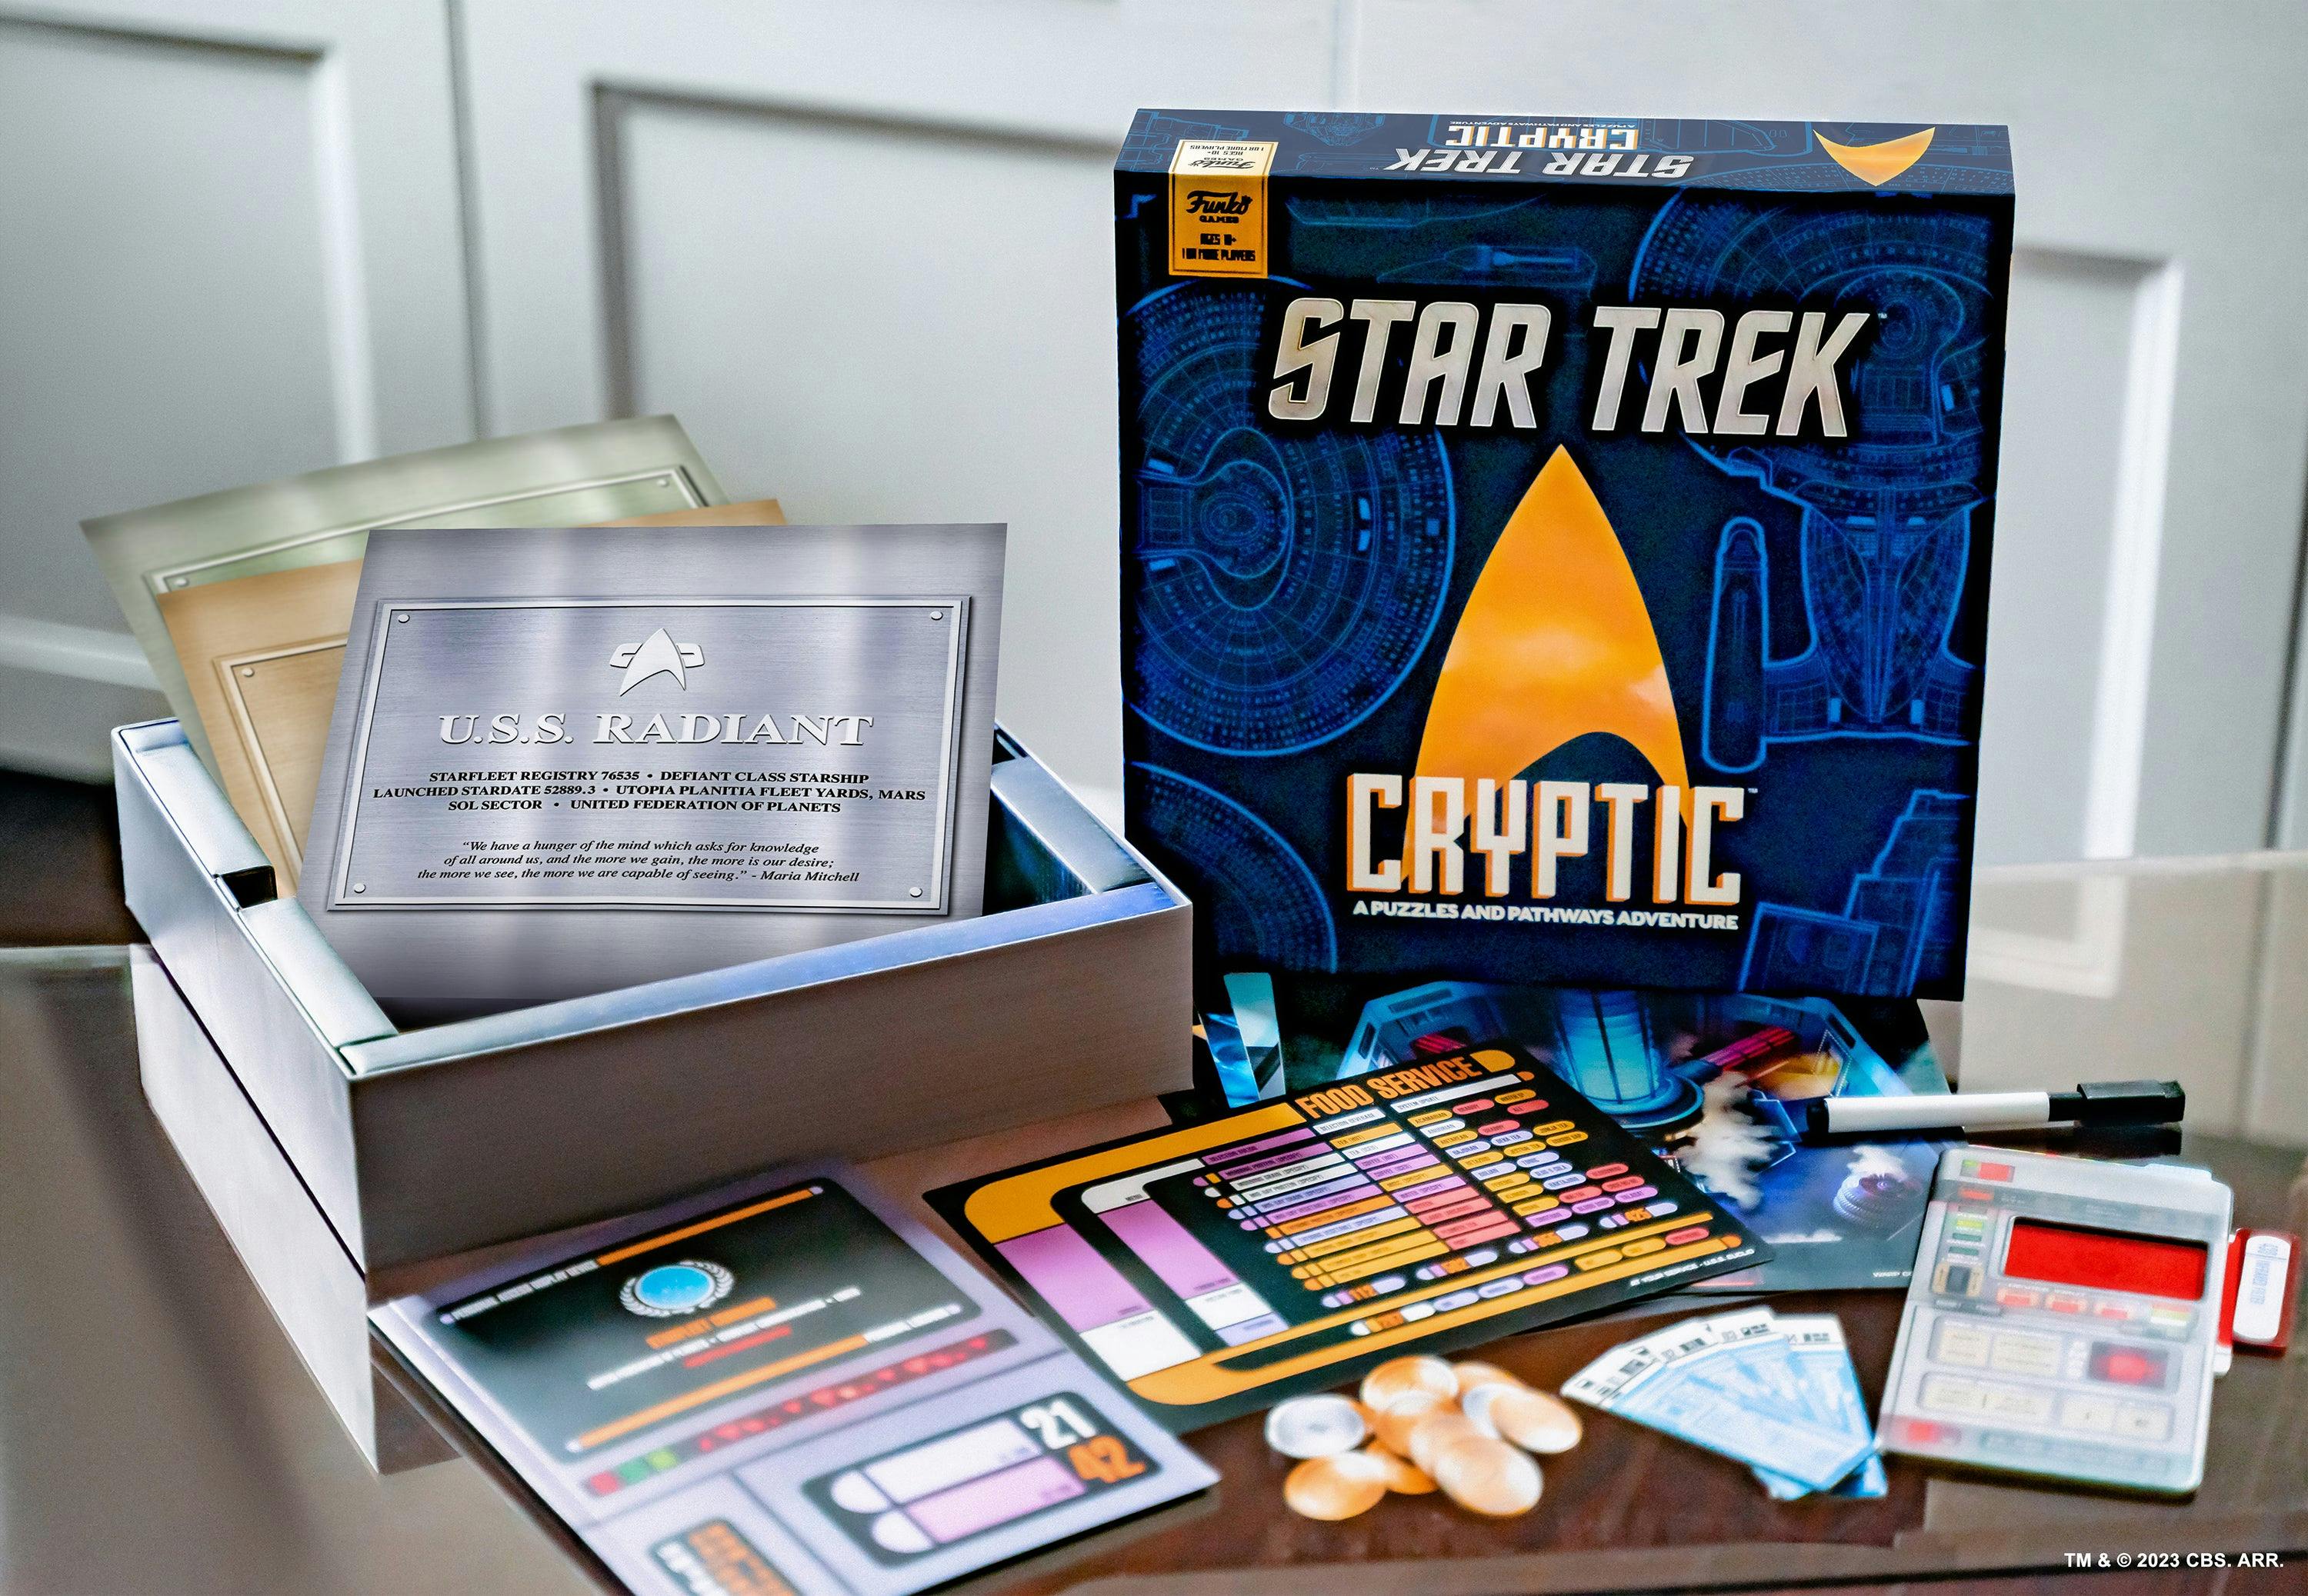 Funko Games' lifestyle photo of Star Trek Cryptic: A Puzzles and Pathways Adventure game